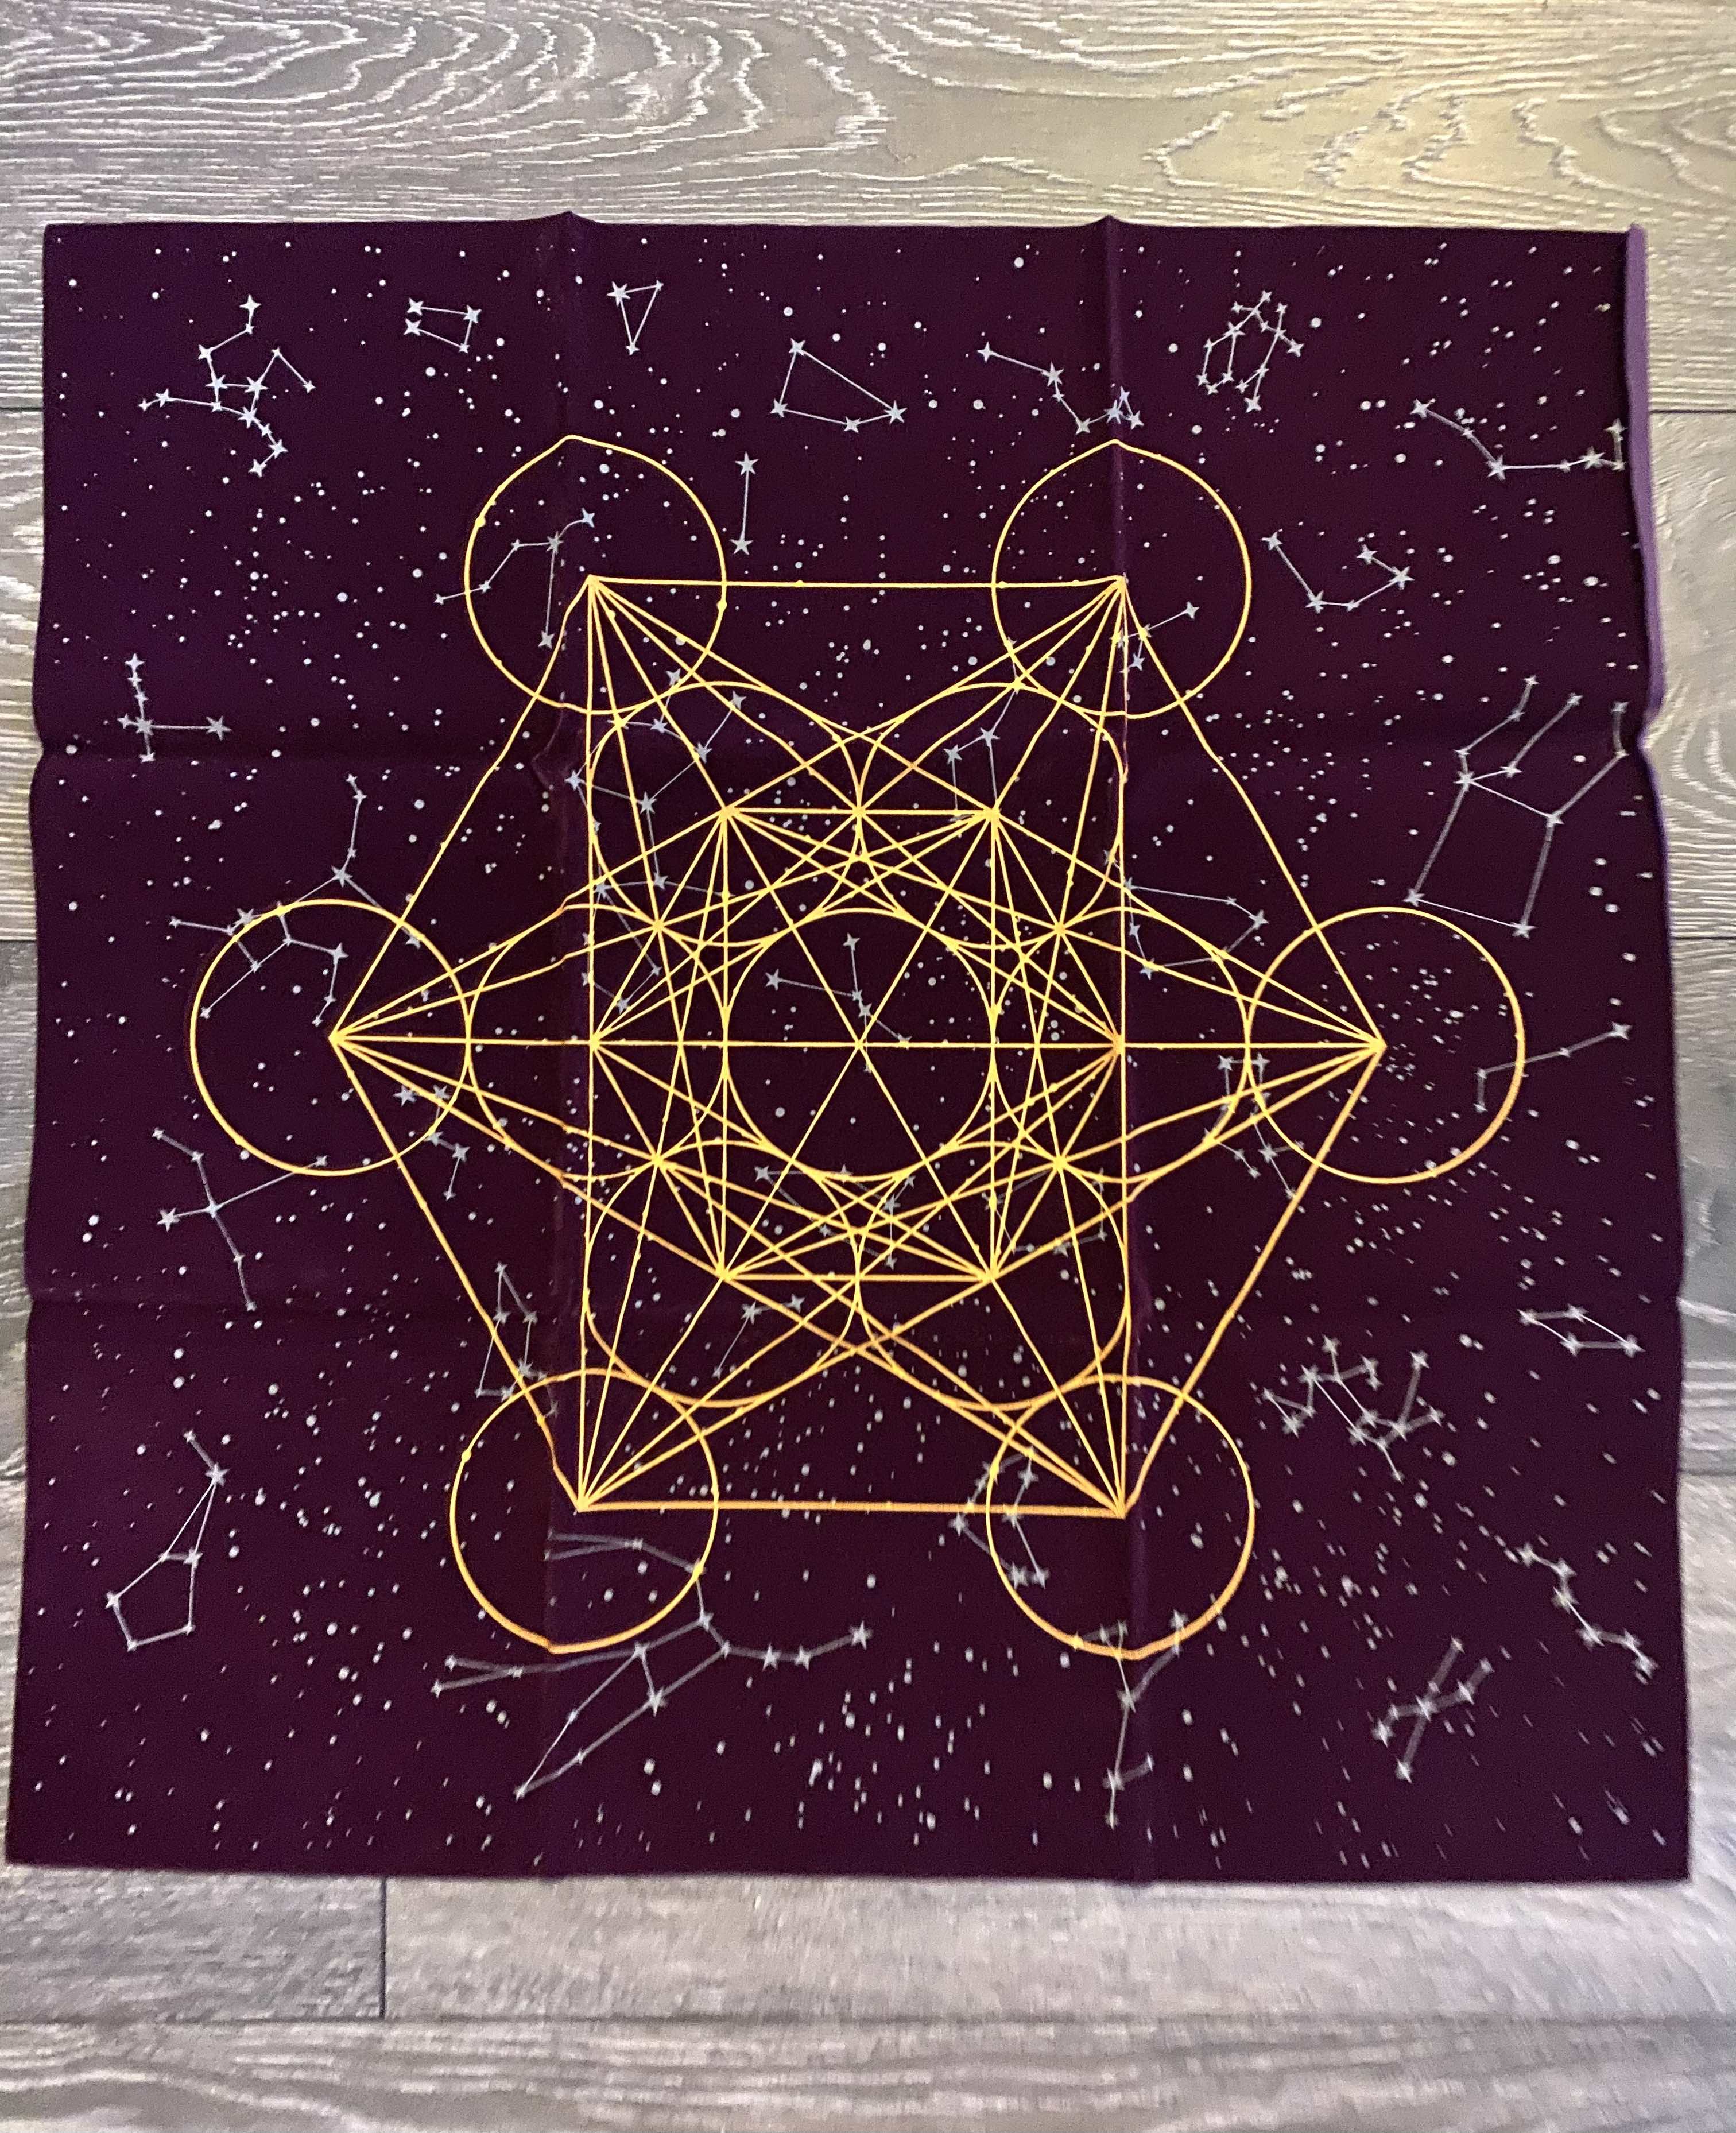 Tarot Card Tablecloth with Methatrone's Geometry